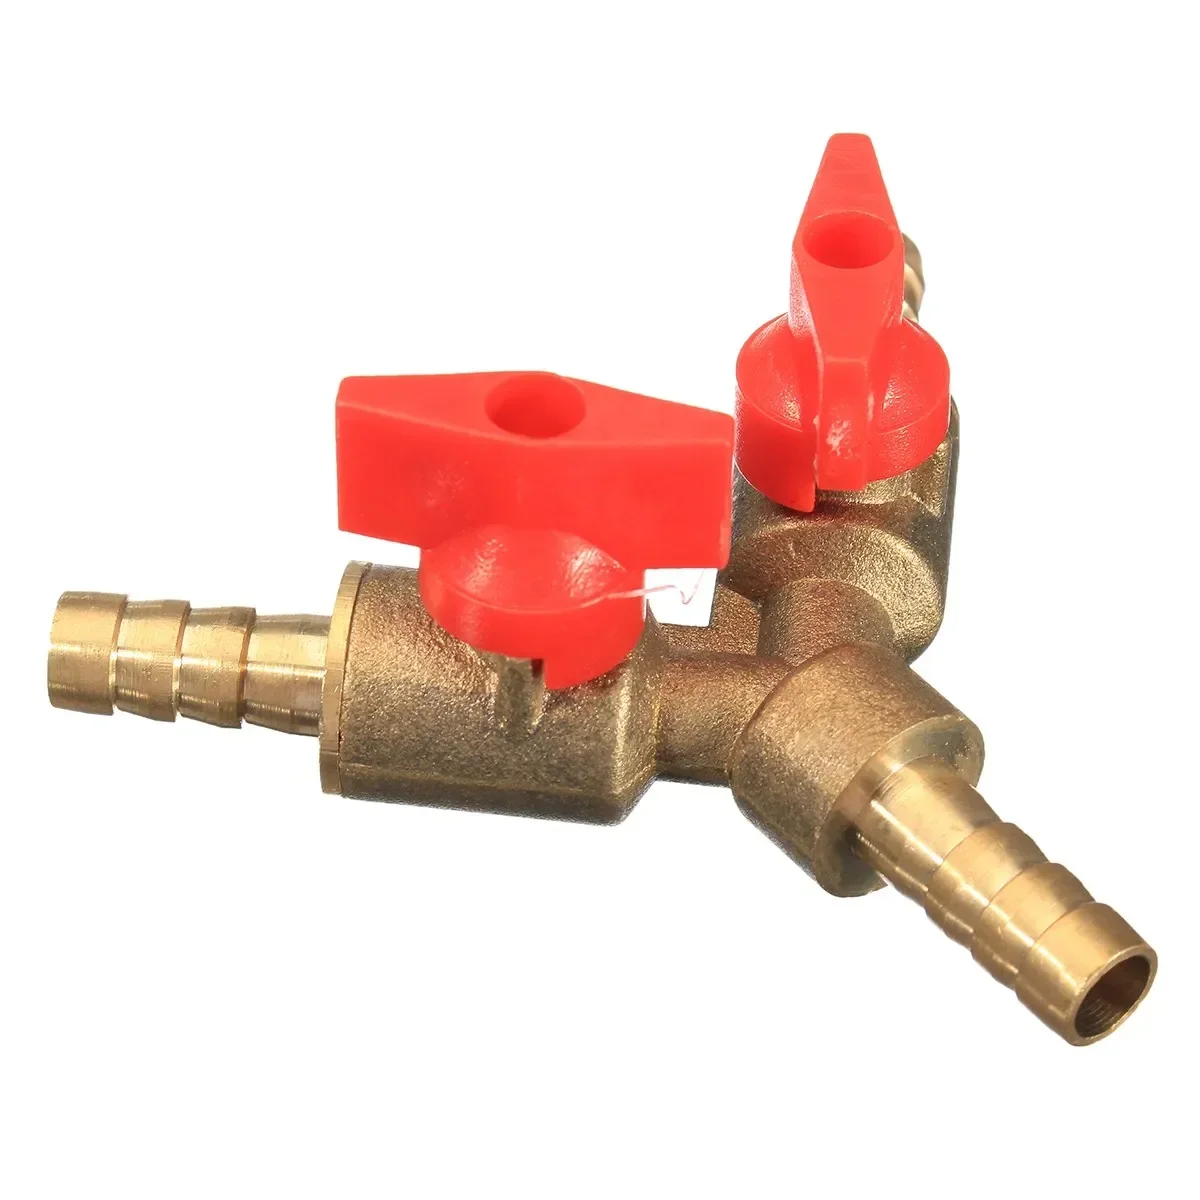 

8mm 3-Way 5/16" Brass Y Shut off Ball Valve Fitting Hose Barb Fuel Gas CLAMP Tee